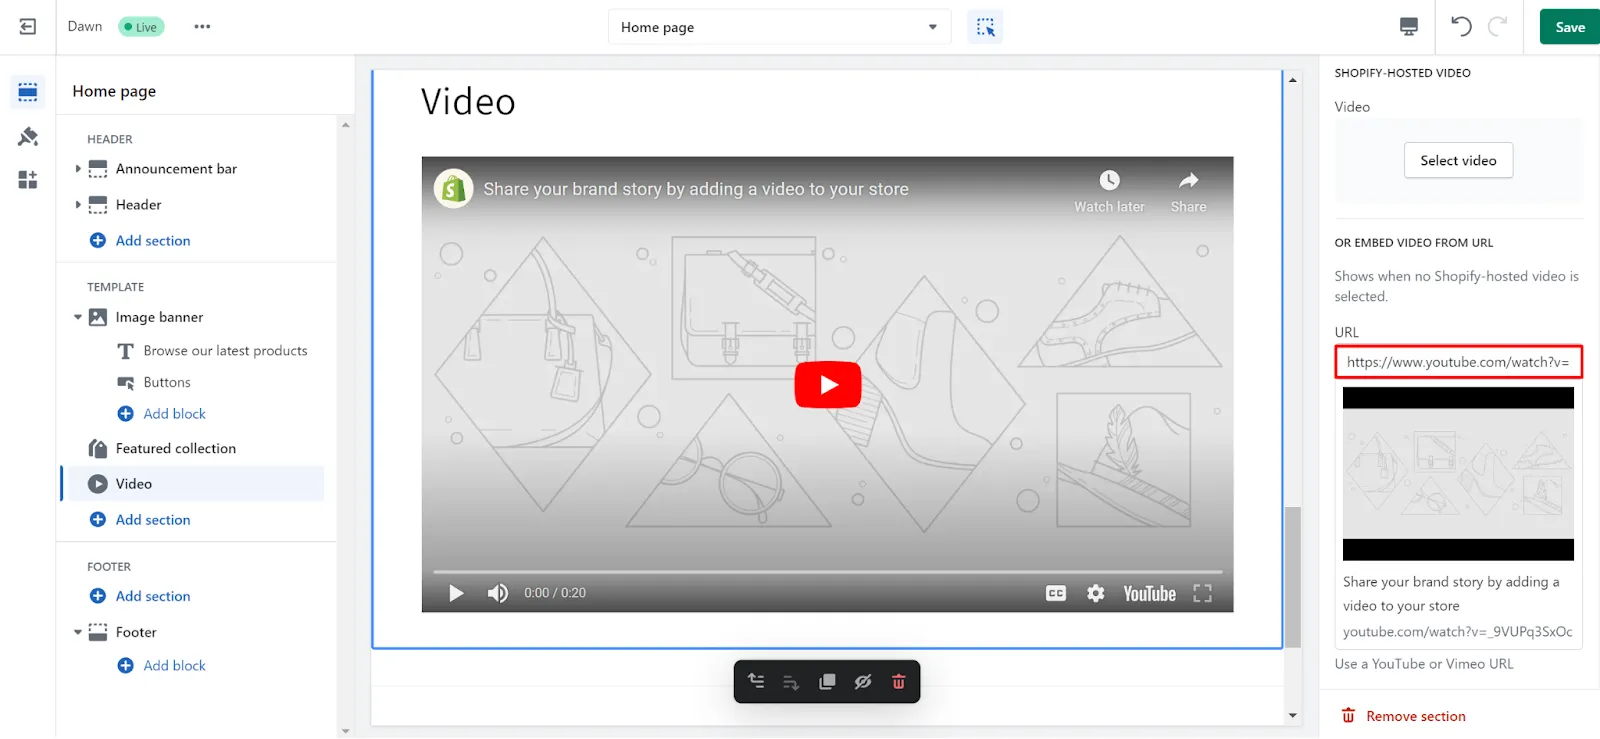 How to add video to Shopfy homepage by embedding YouTube video